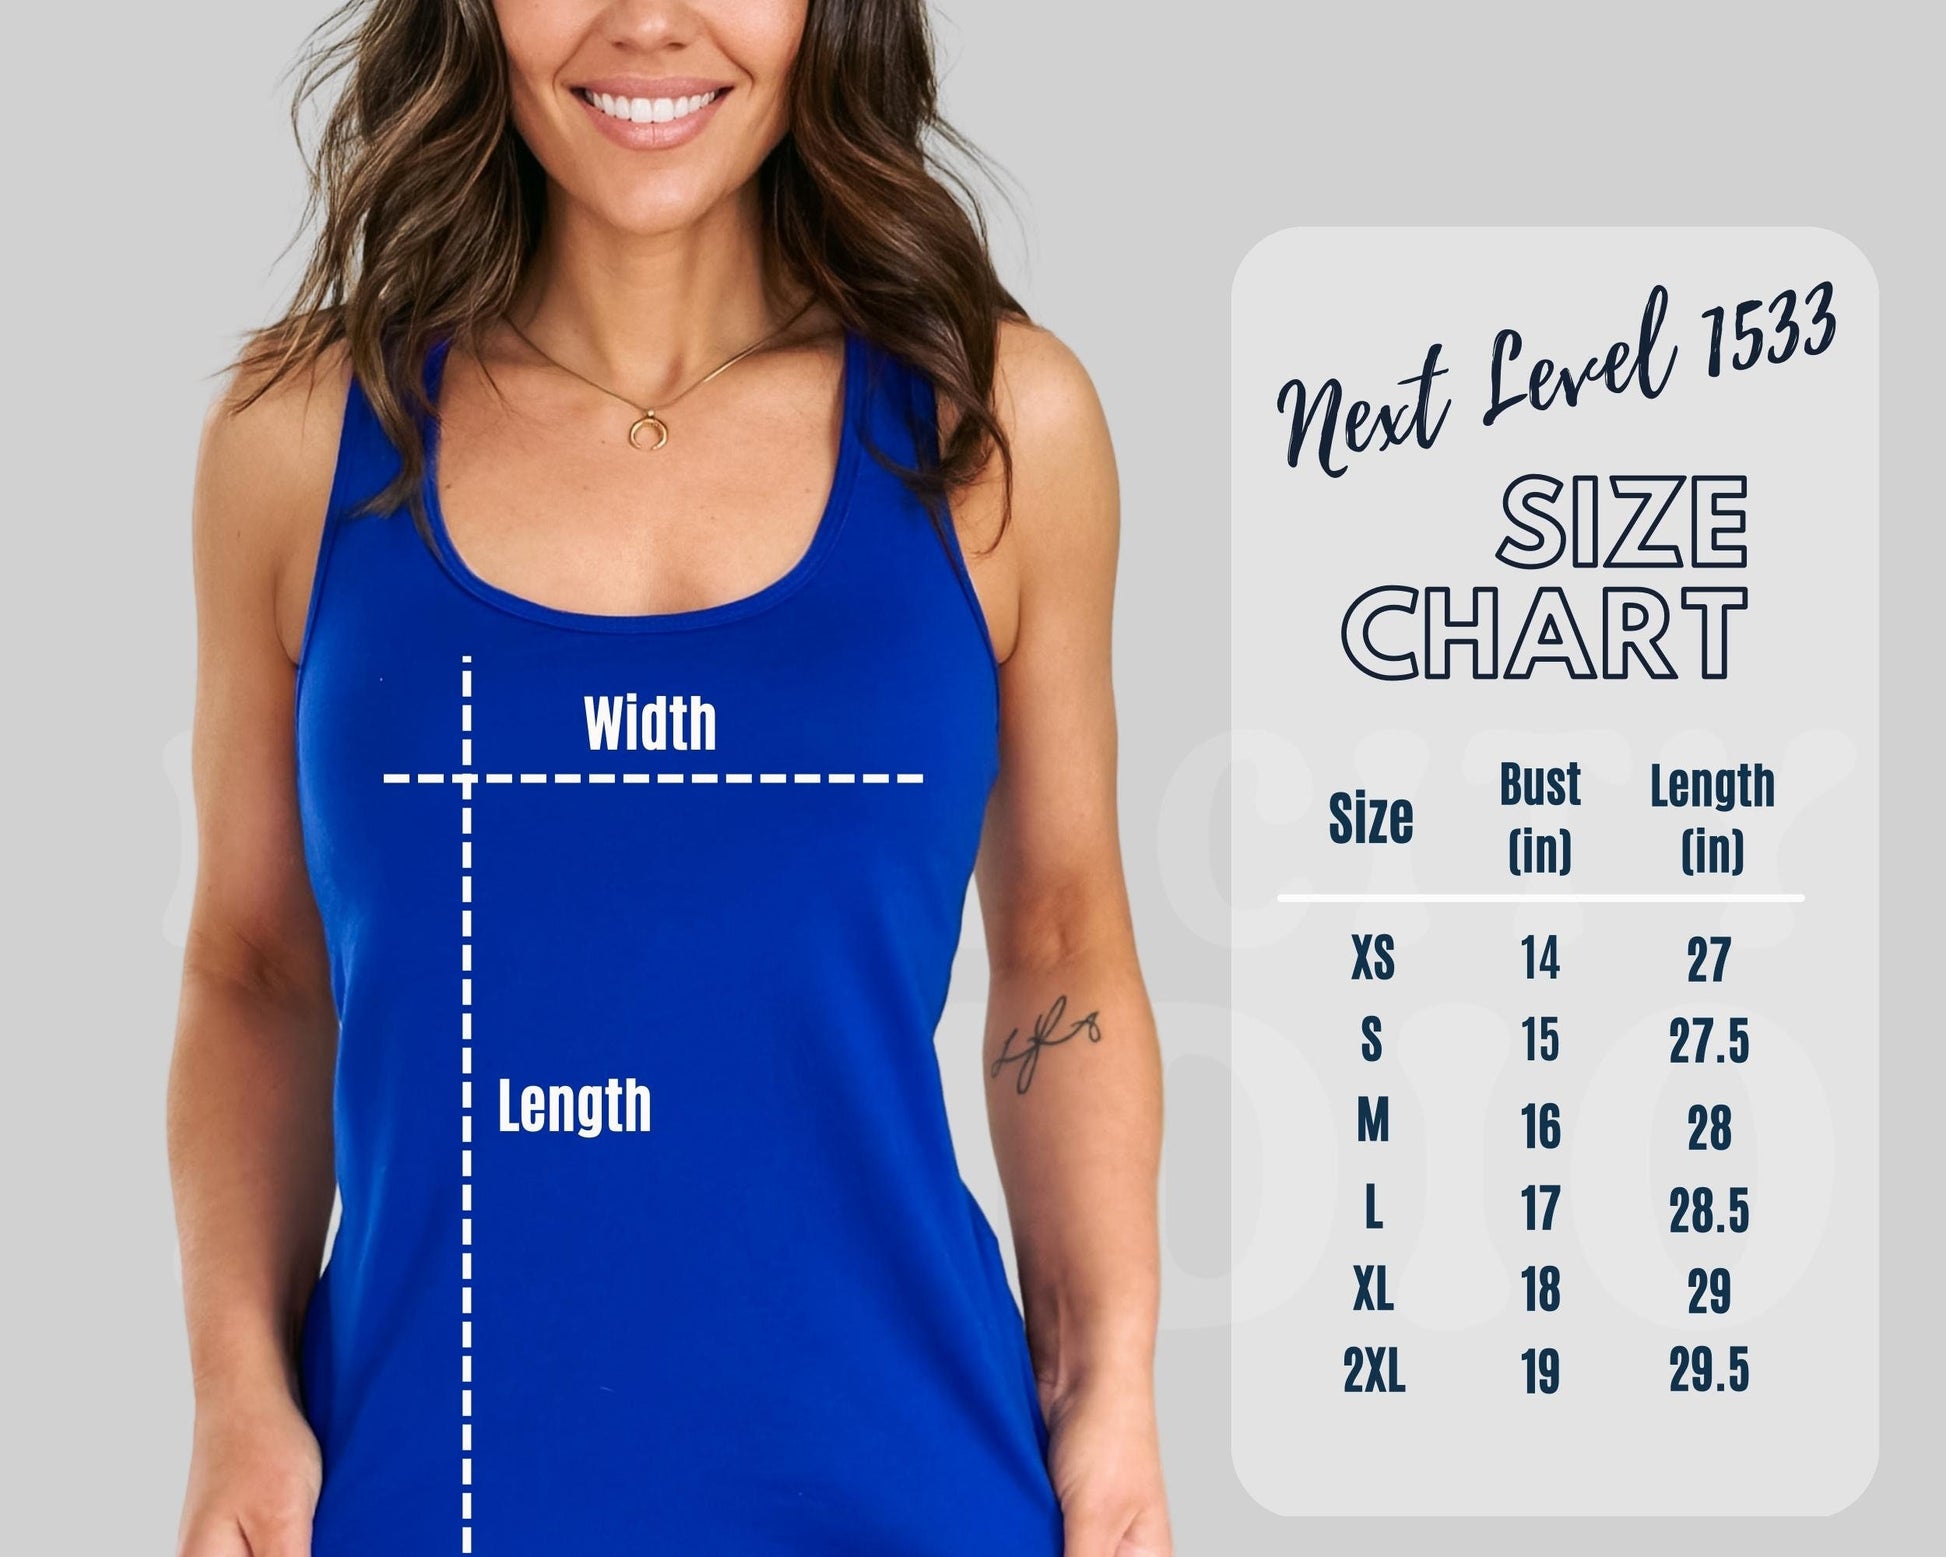 a woman wearing a blue tank top with measurements